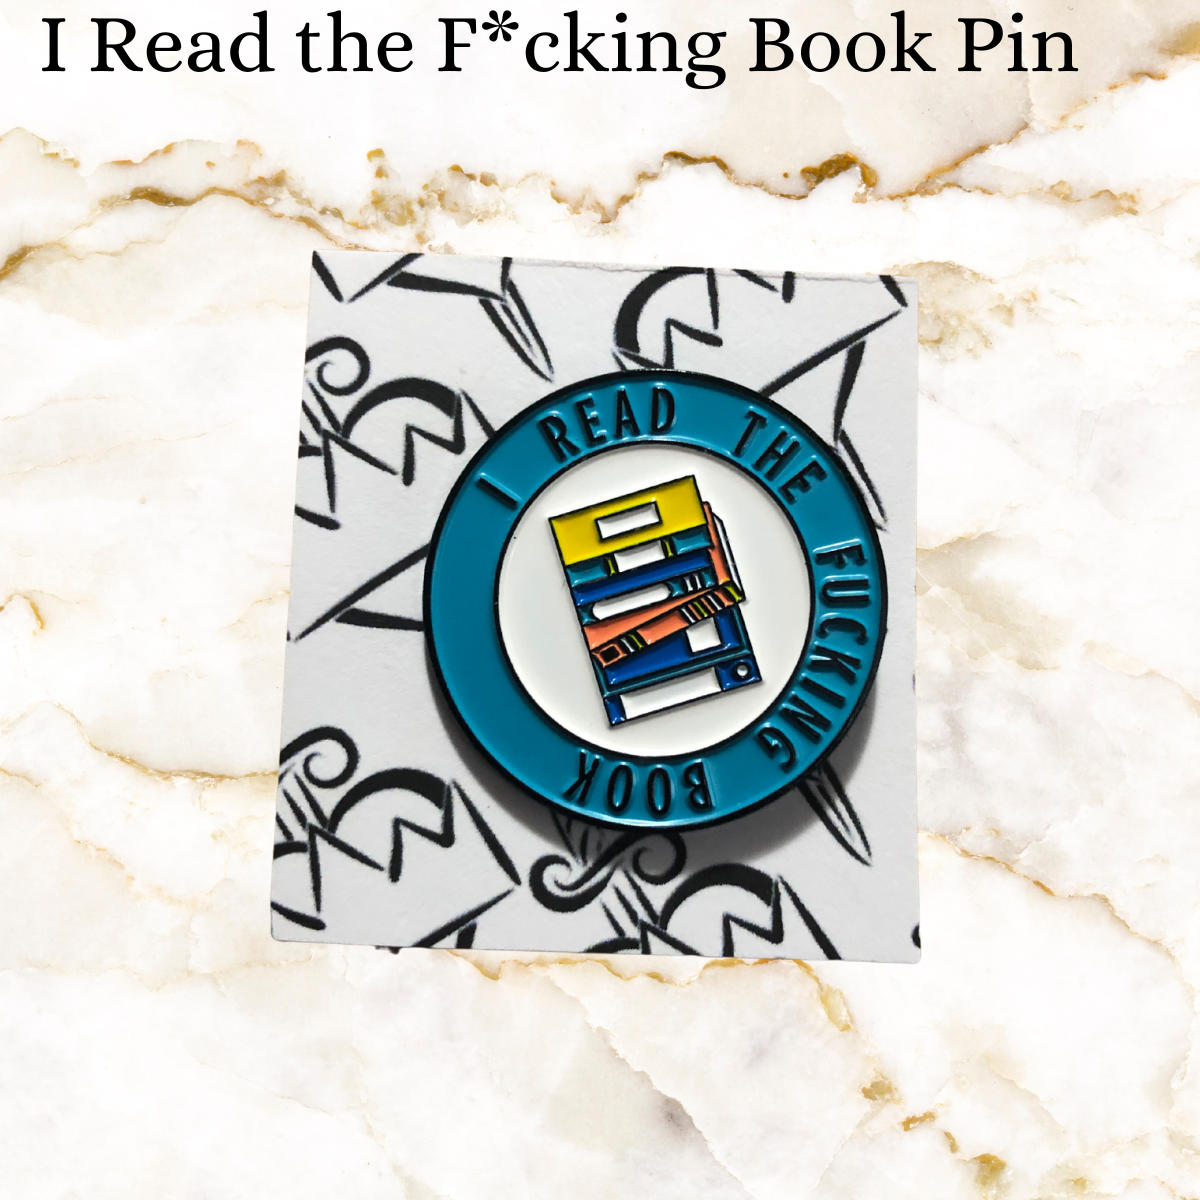 Book pin - blue cirlce. inside a white cirlce with stack of 7 books of blue and yellow and orange. Outside blue circl says I read the Fucking book